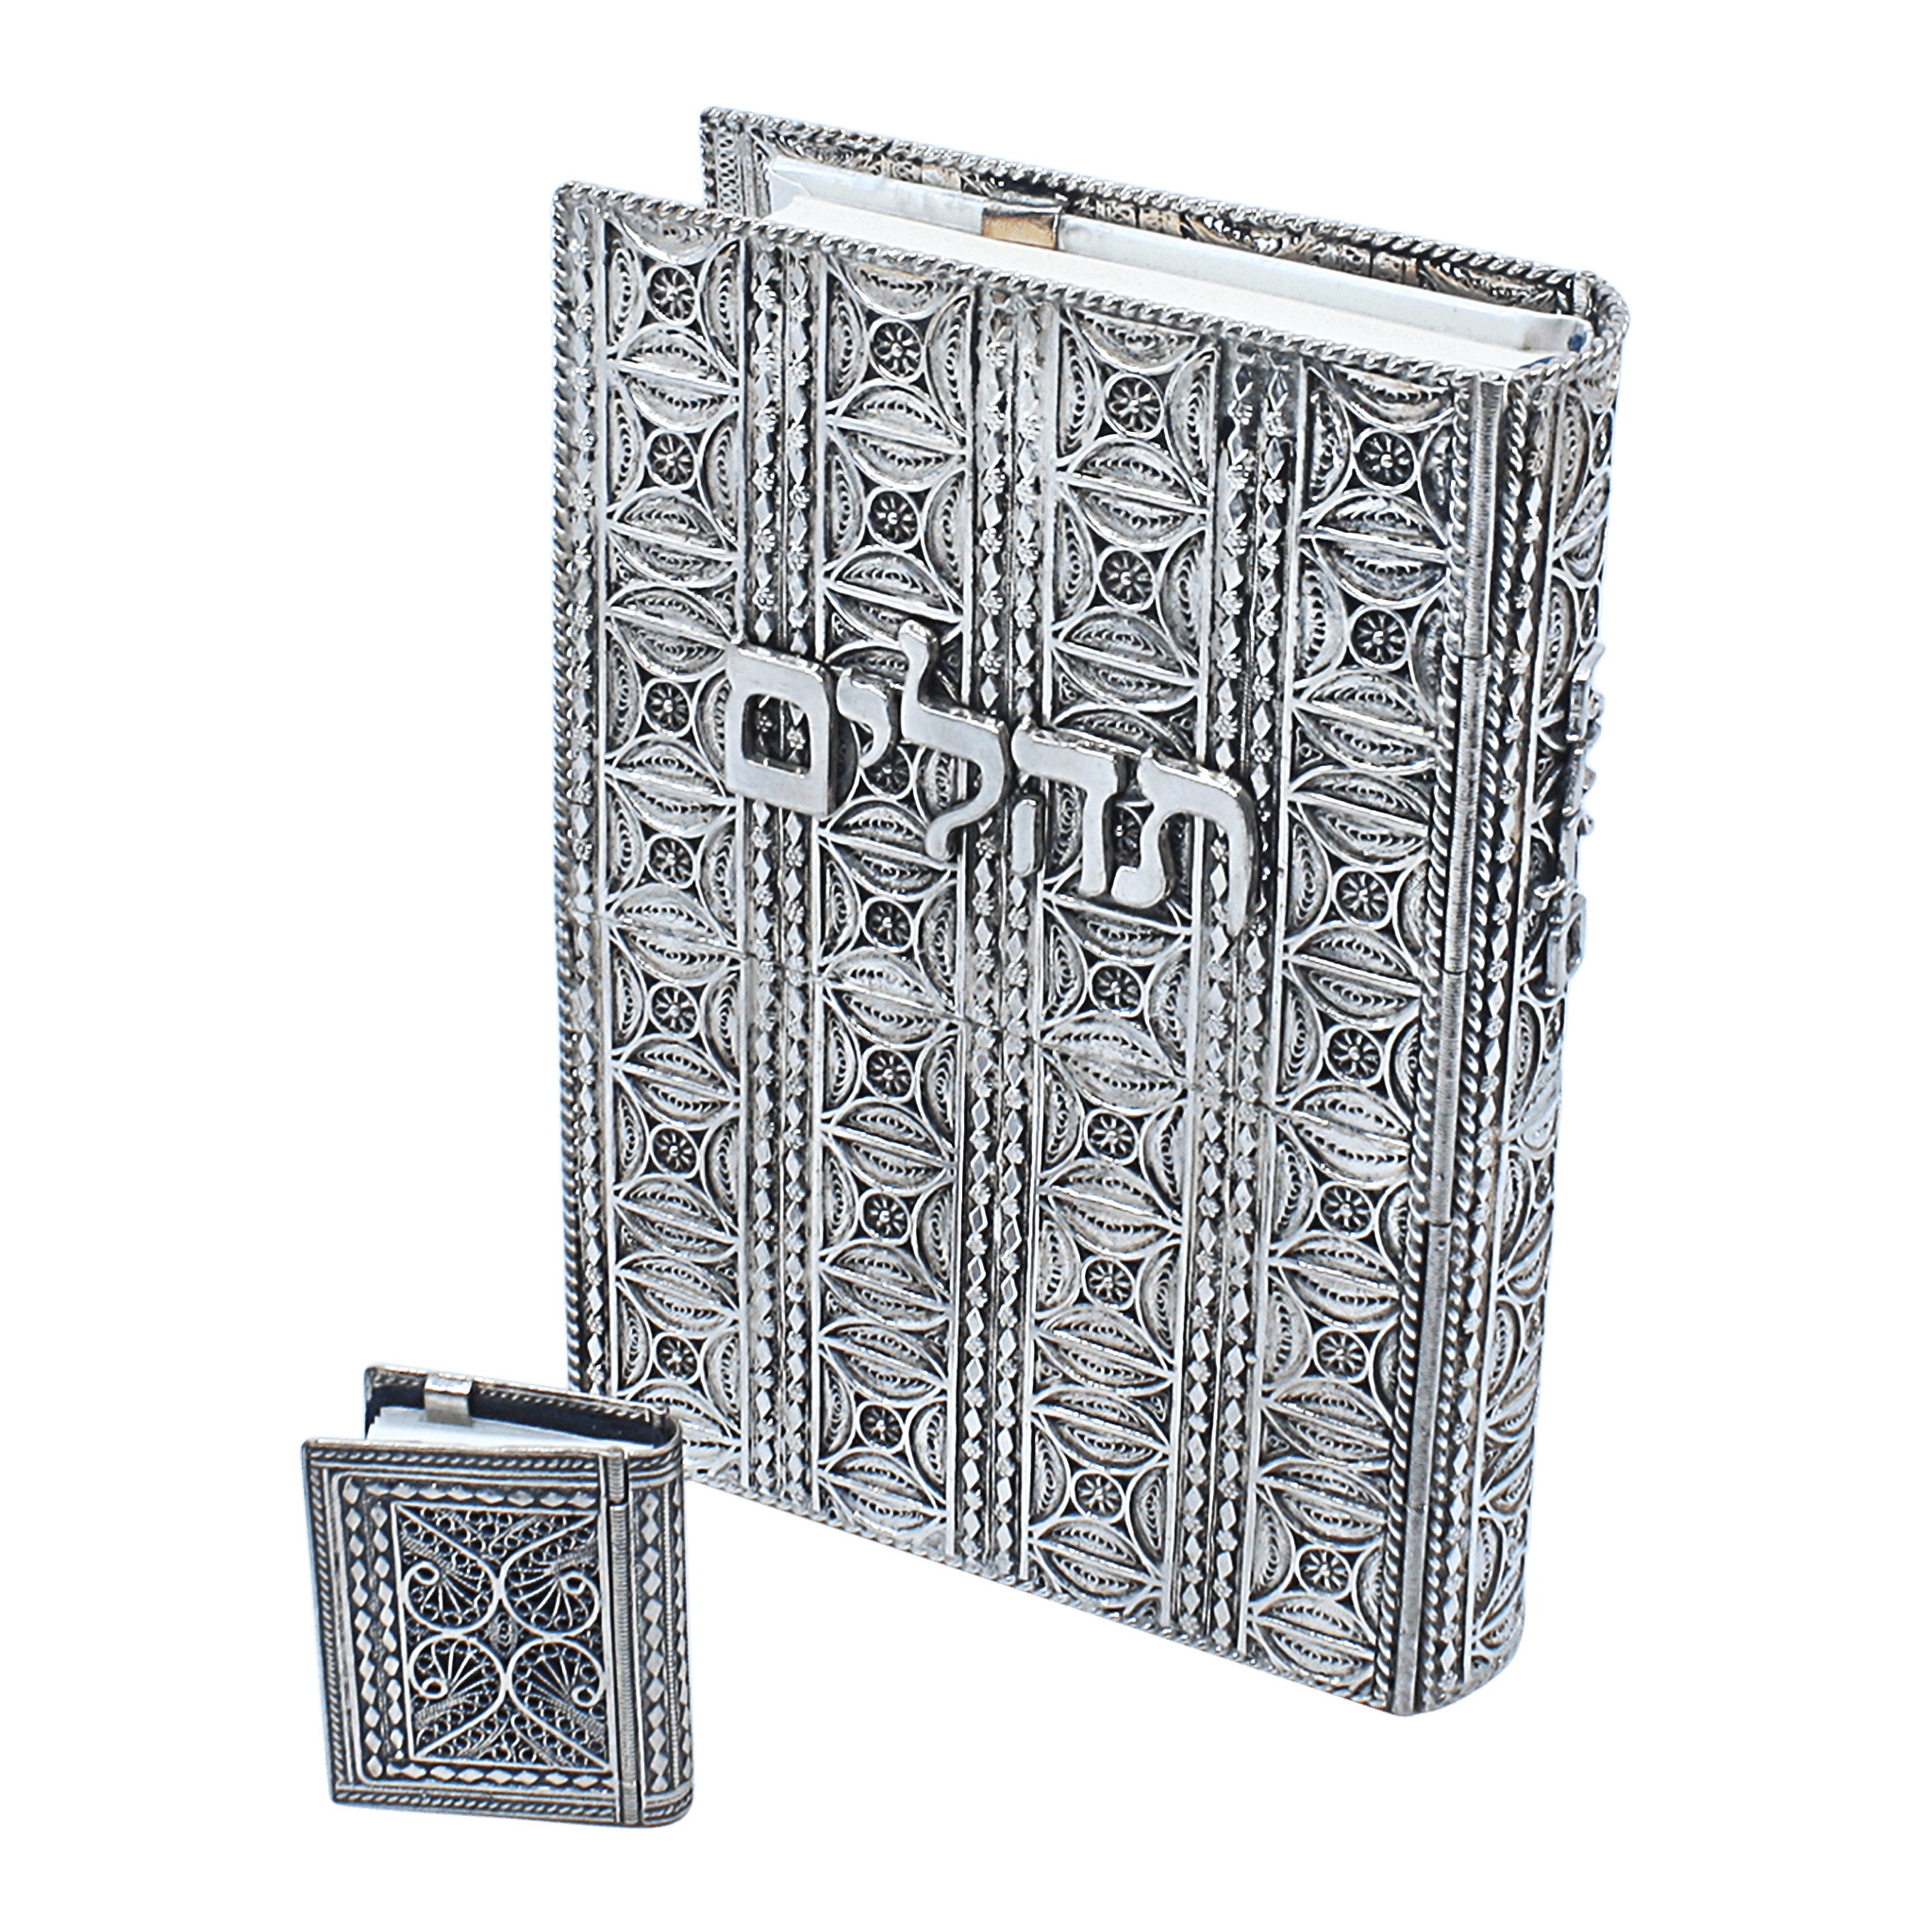 Psalms Silver Filigree Cover B - Piece By Zion Hadad